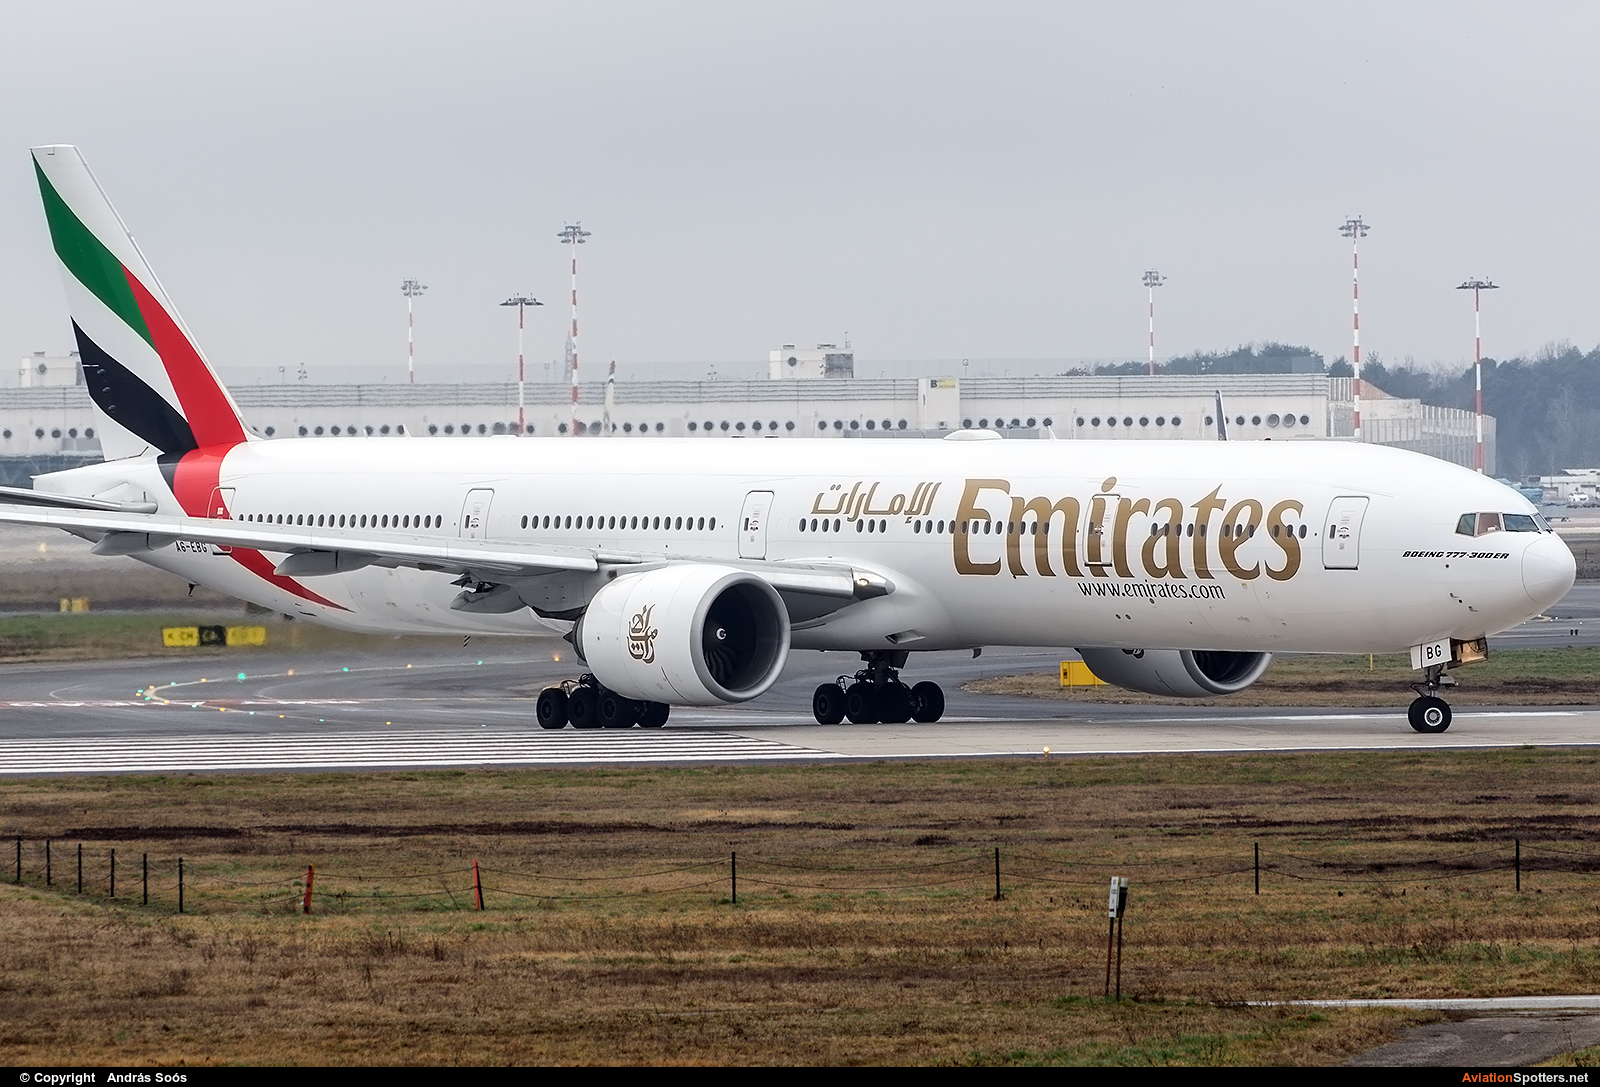 Emirates Airlines  -  777-300ER  (A6-EBG) By András Soós (sas1965)